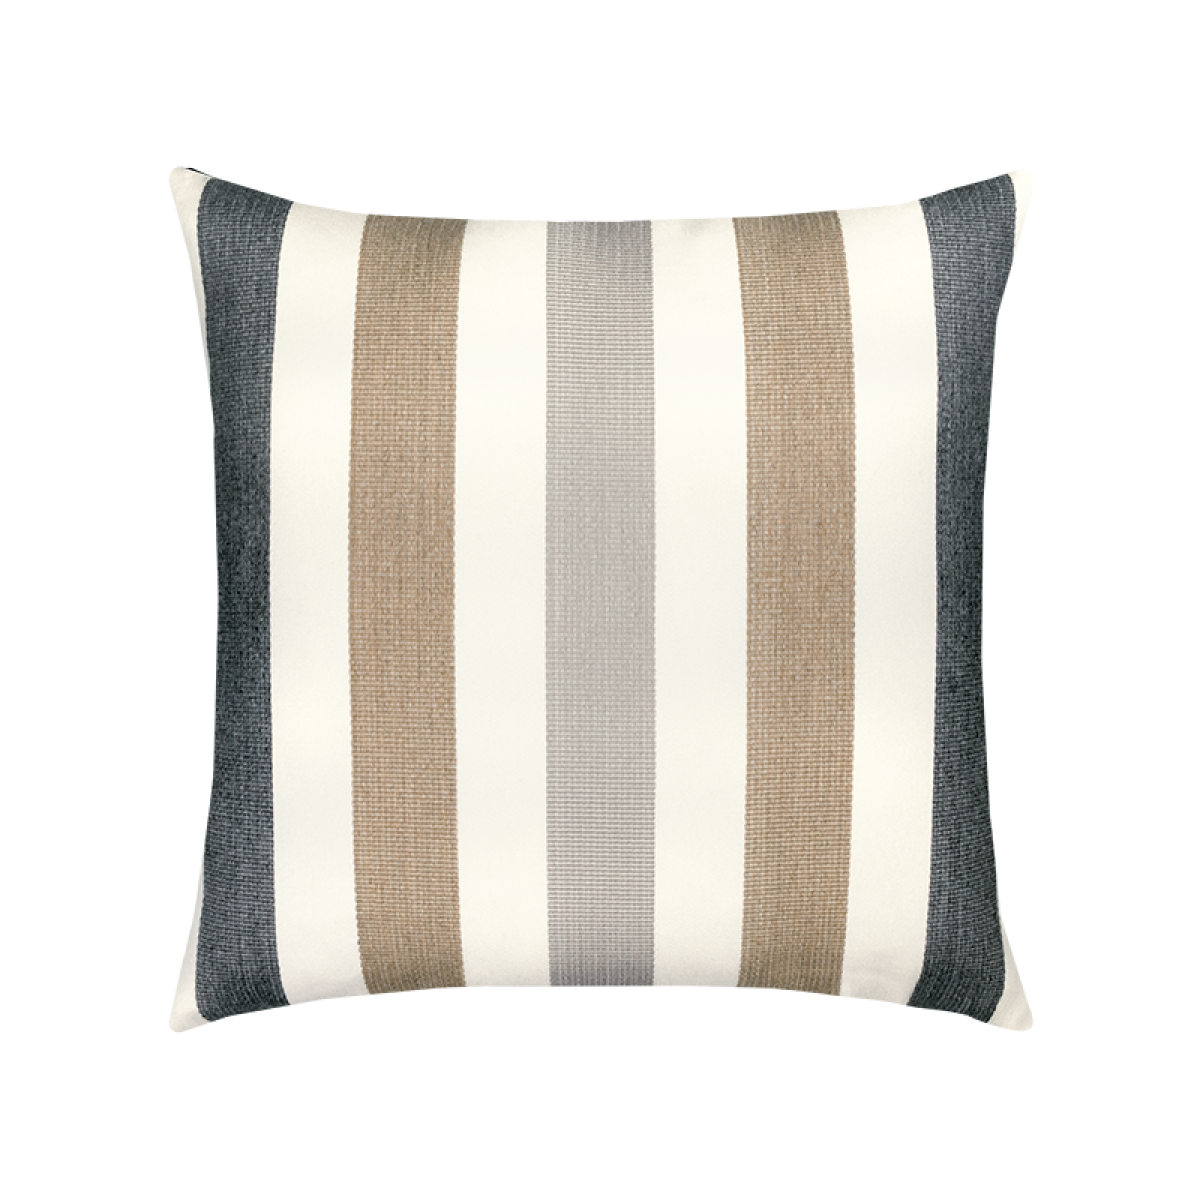 Dune Stripe - This item will ship by 2/1